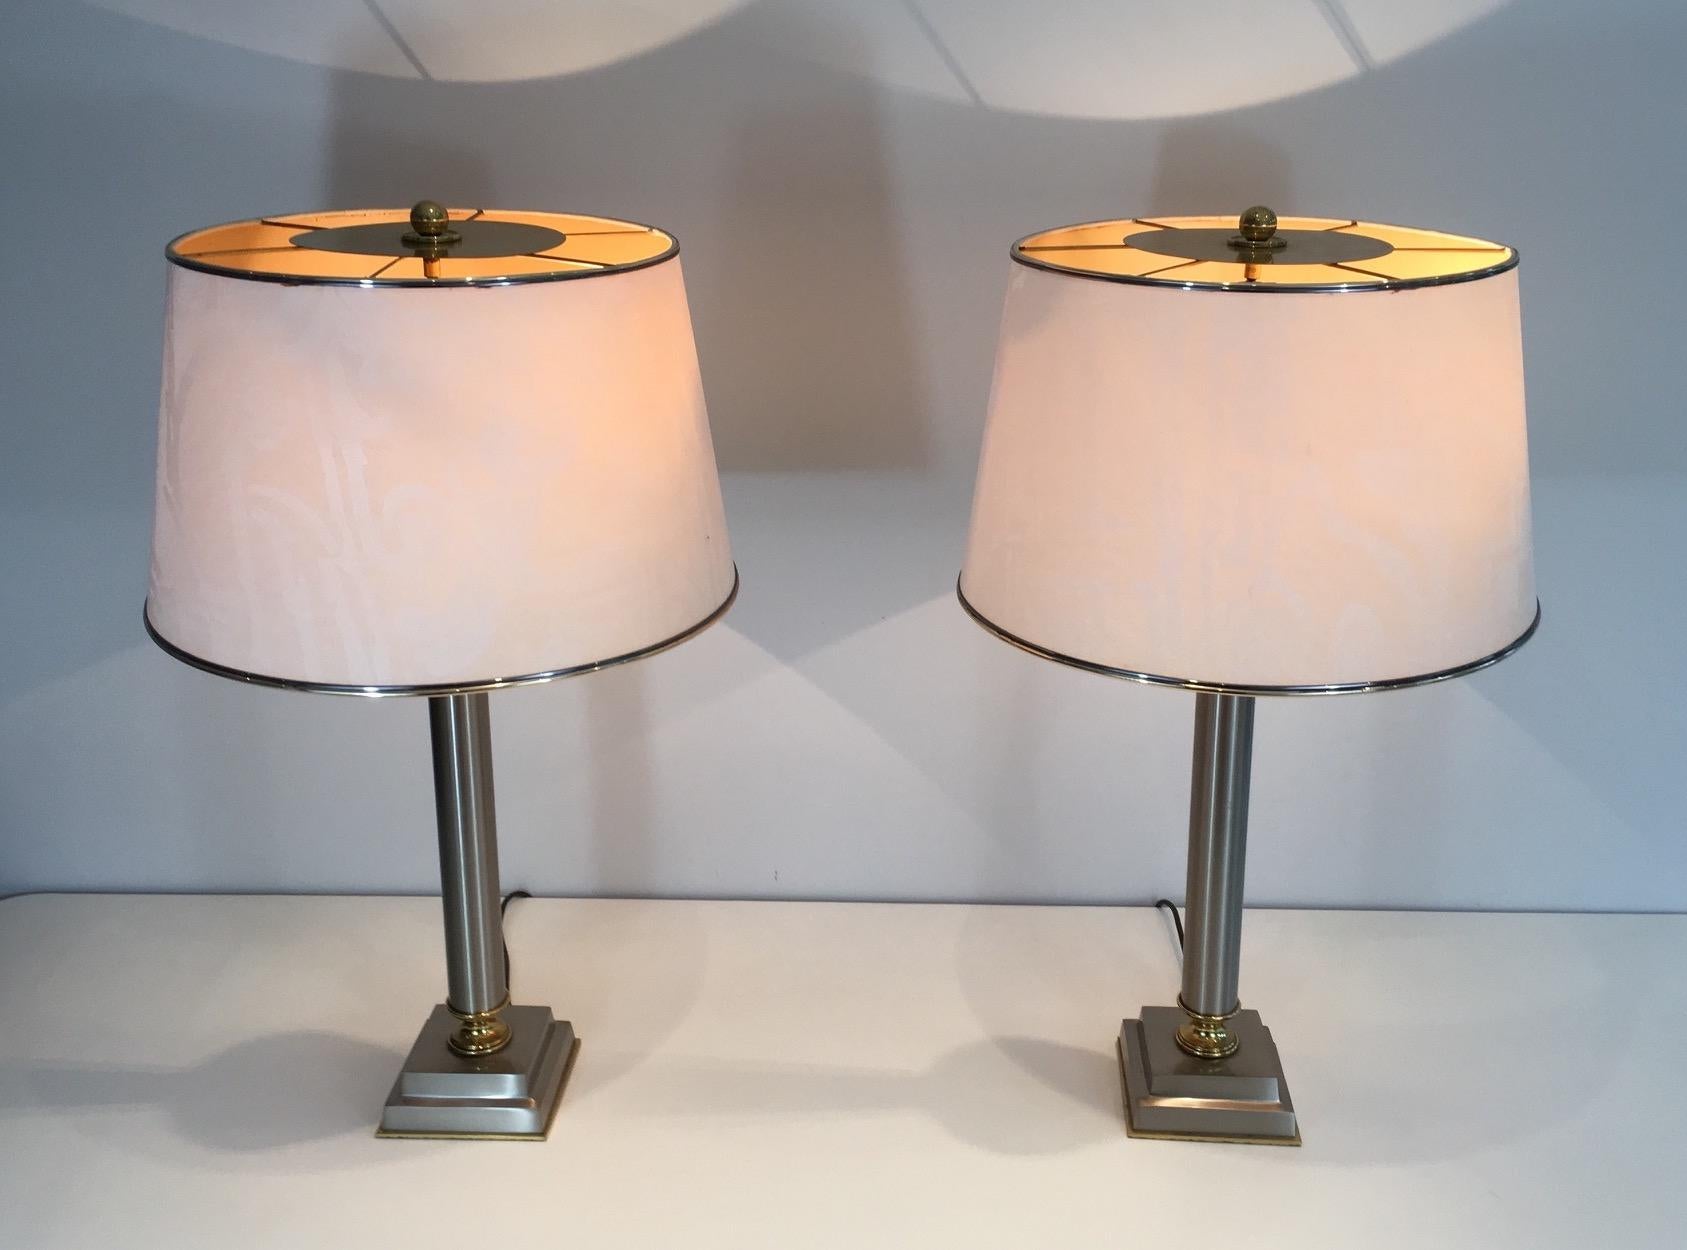 French Pair of Brushed Steel and Brass Lamps with Reclining Shades by Guy Lefèvre